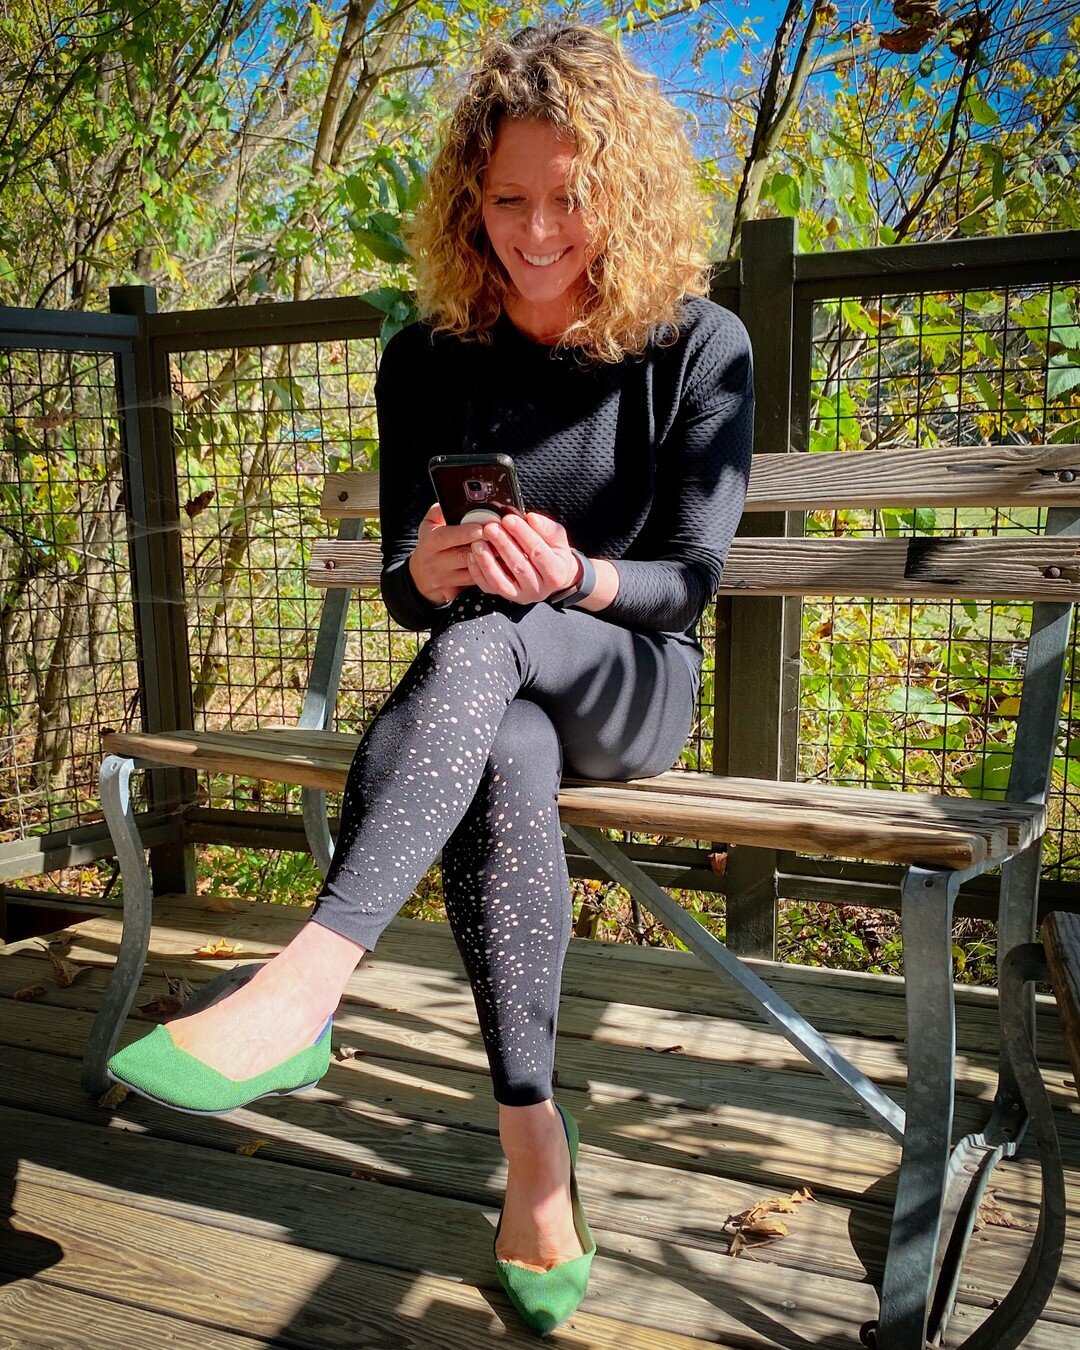 I don&rsquo;t always where shoes that aren&rsquo;t sneakers, but when I do these @rothys are a comfy, sustainable choice and a fun way to add a pop of color to one of my fave @caliabycarrie ensembles. ⠀⠀⠀⠀⠀⠀⠀⠀⠀
⠀⠀⠀⠀⠀⠀⠀⠀⠀
Thanks for the shoe hookup, @